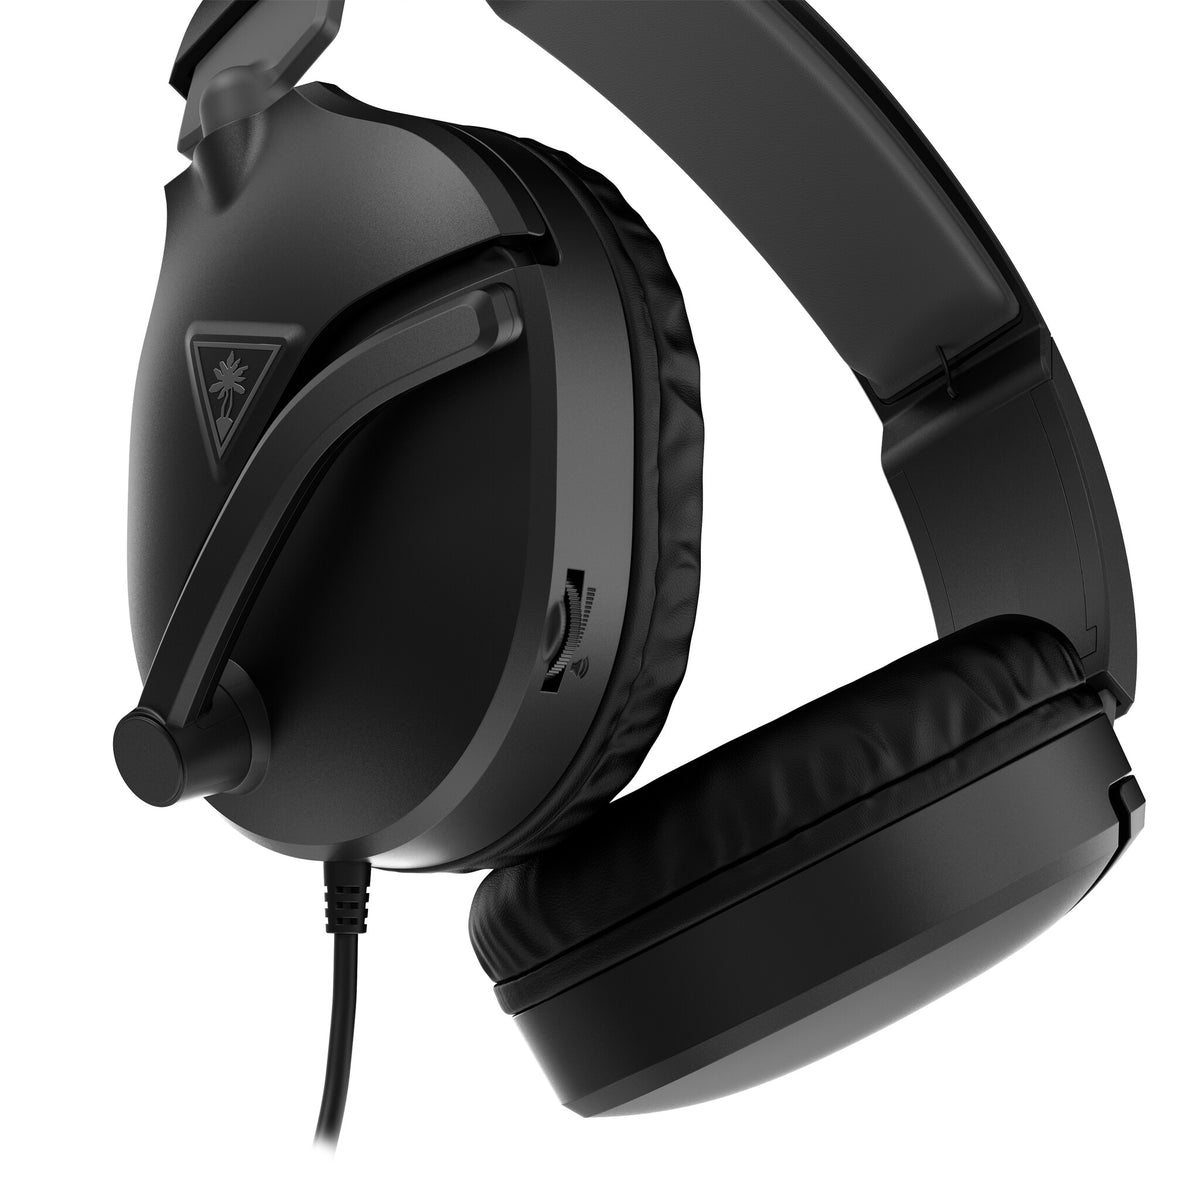 Turtle Beach Recon 70 - Wired Gaming Headset for Xbox Series X|S in Black